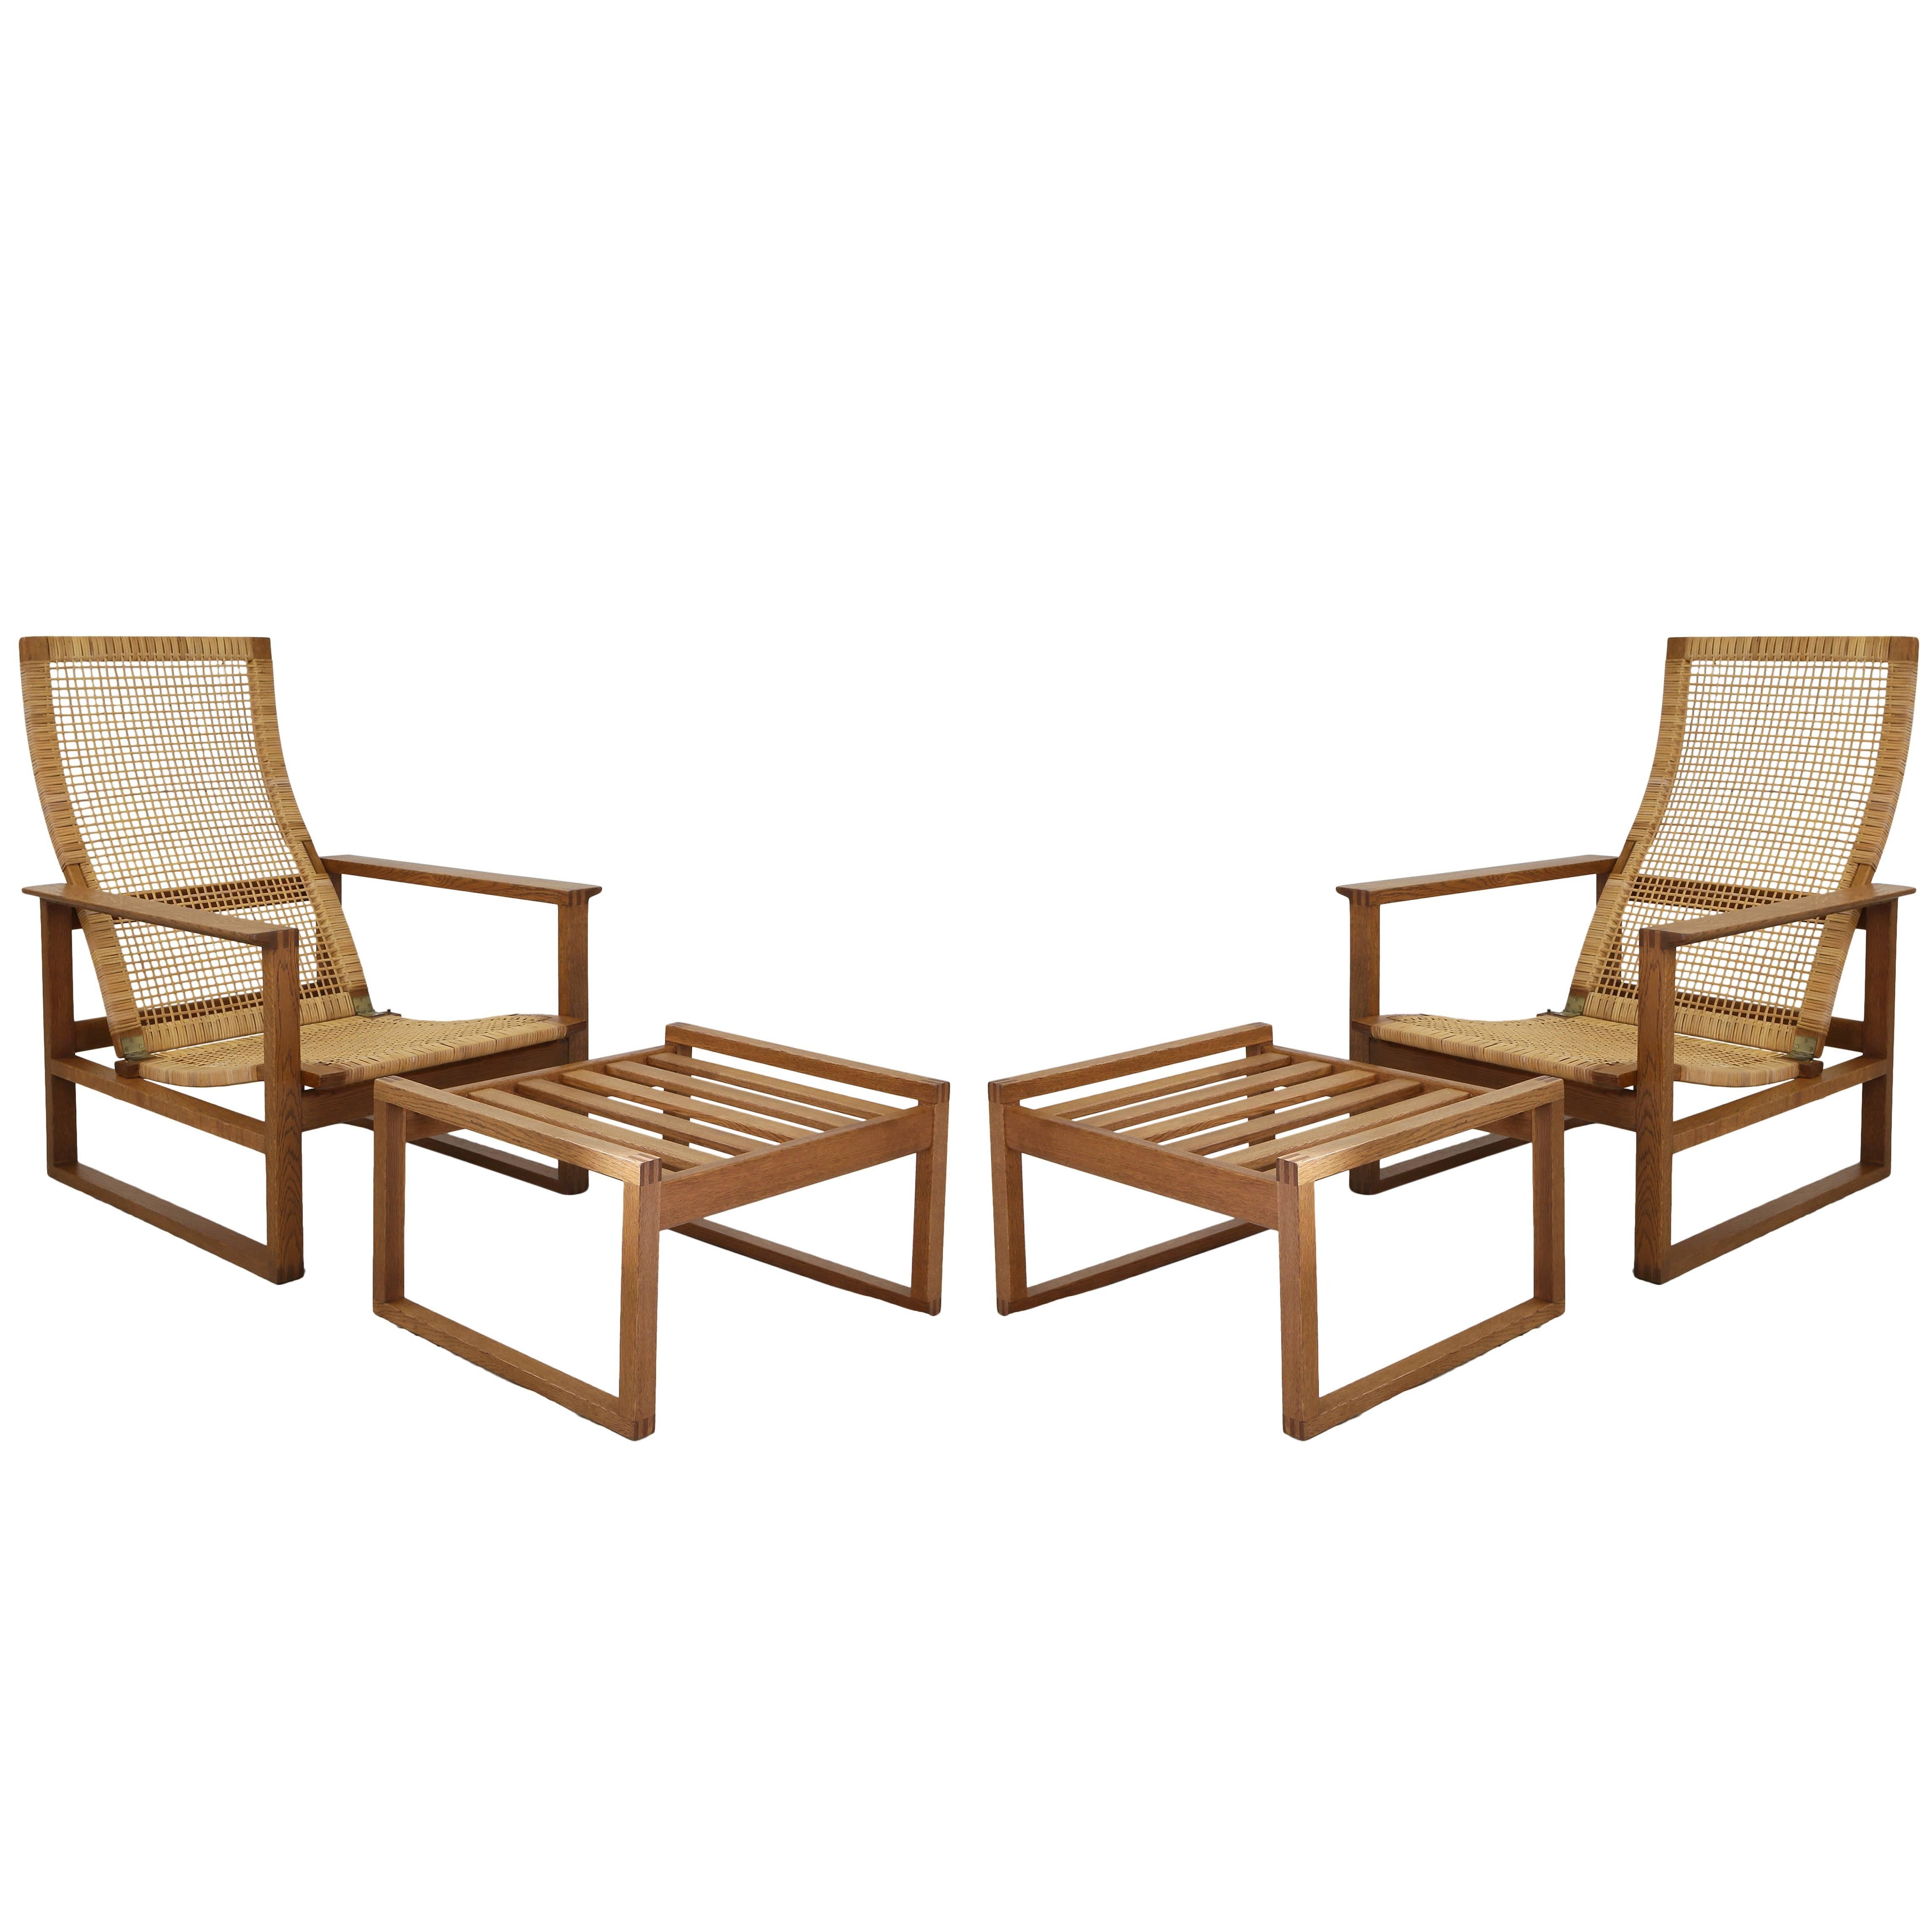 Pair of Oak & Cane Lounge Chairs by Børge Mogensen for Fredericia Stolefabrik